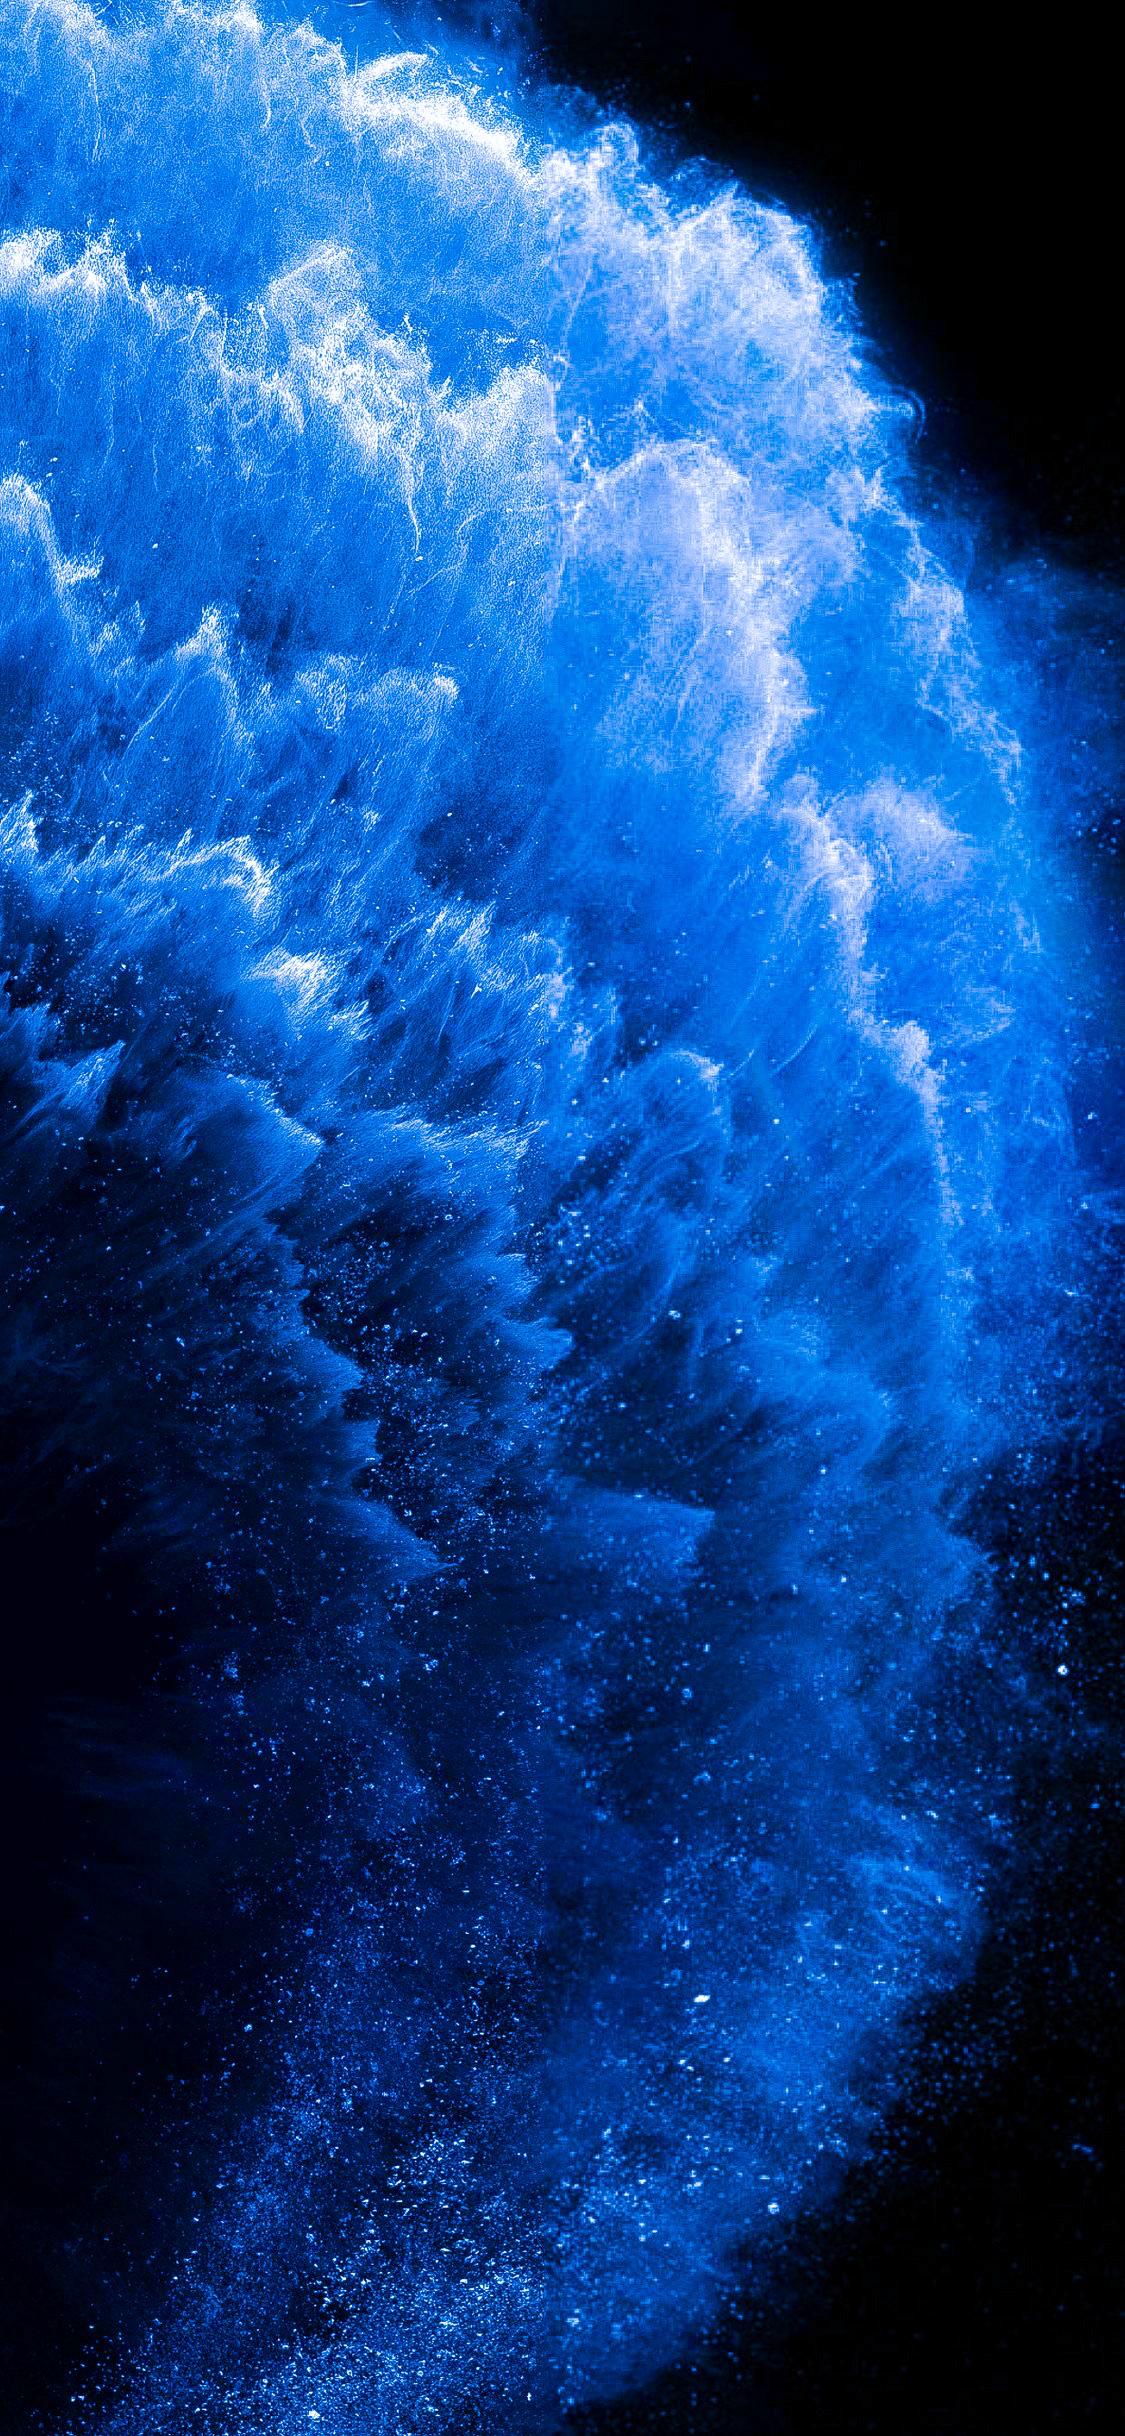 200+] Blue Iphone Wallpapers